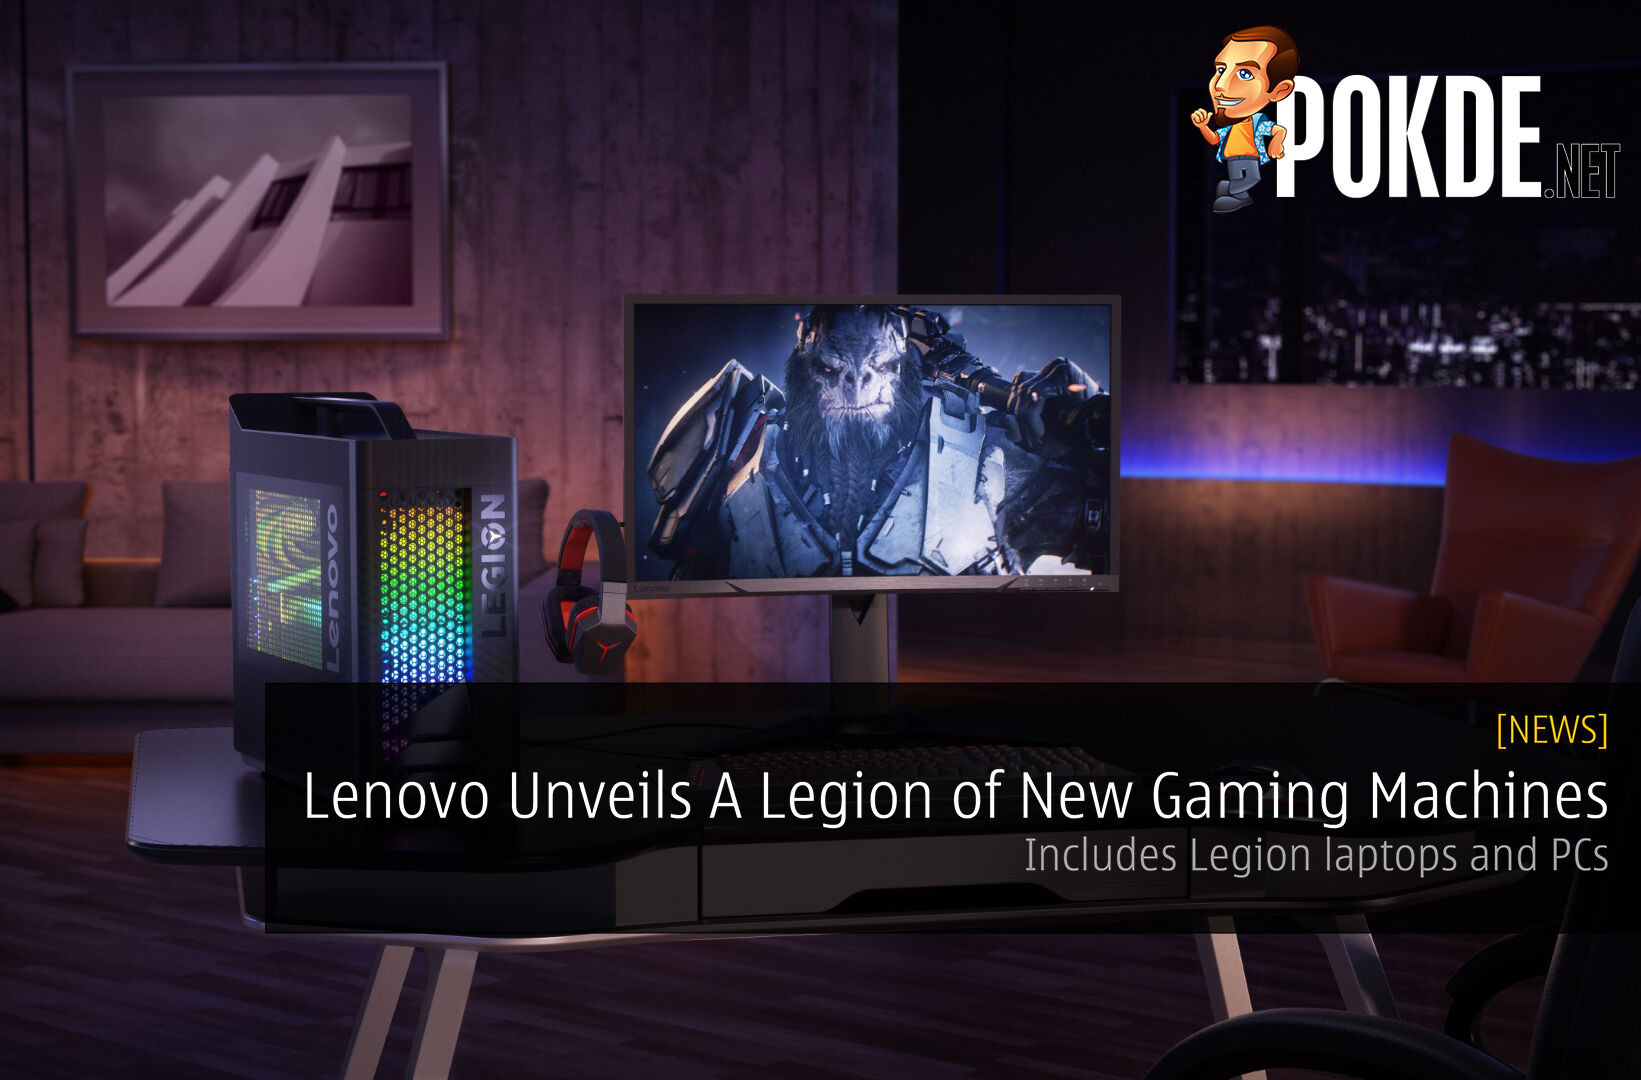 Lenovo Unveils A Legion of New Gaming Machines - Includes Legion laptops and PCs 27